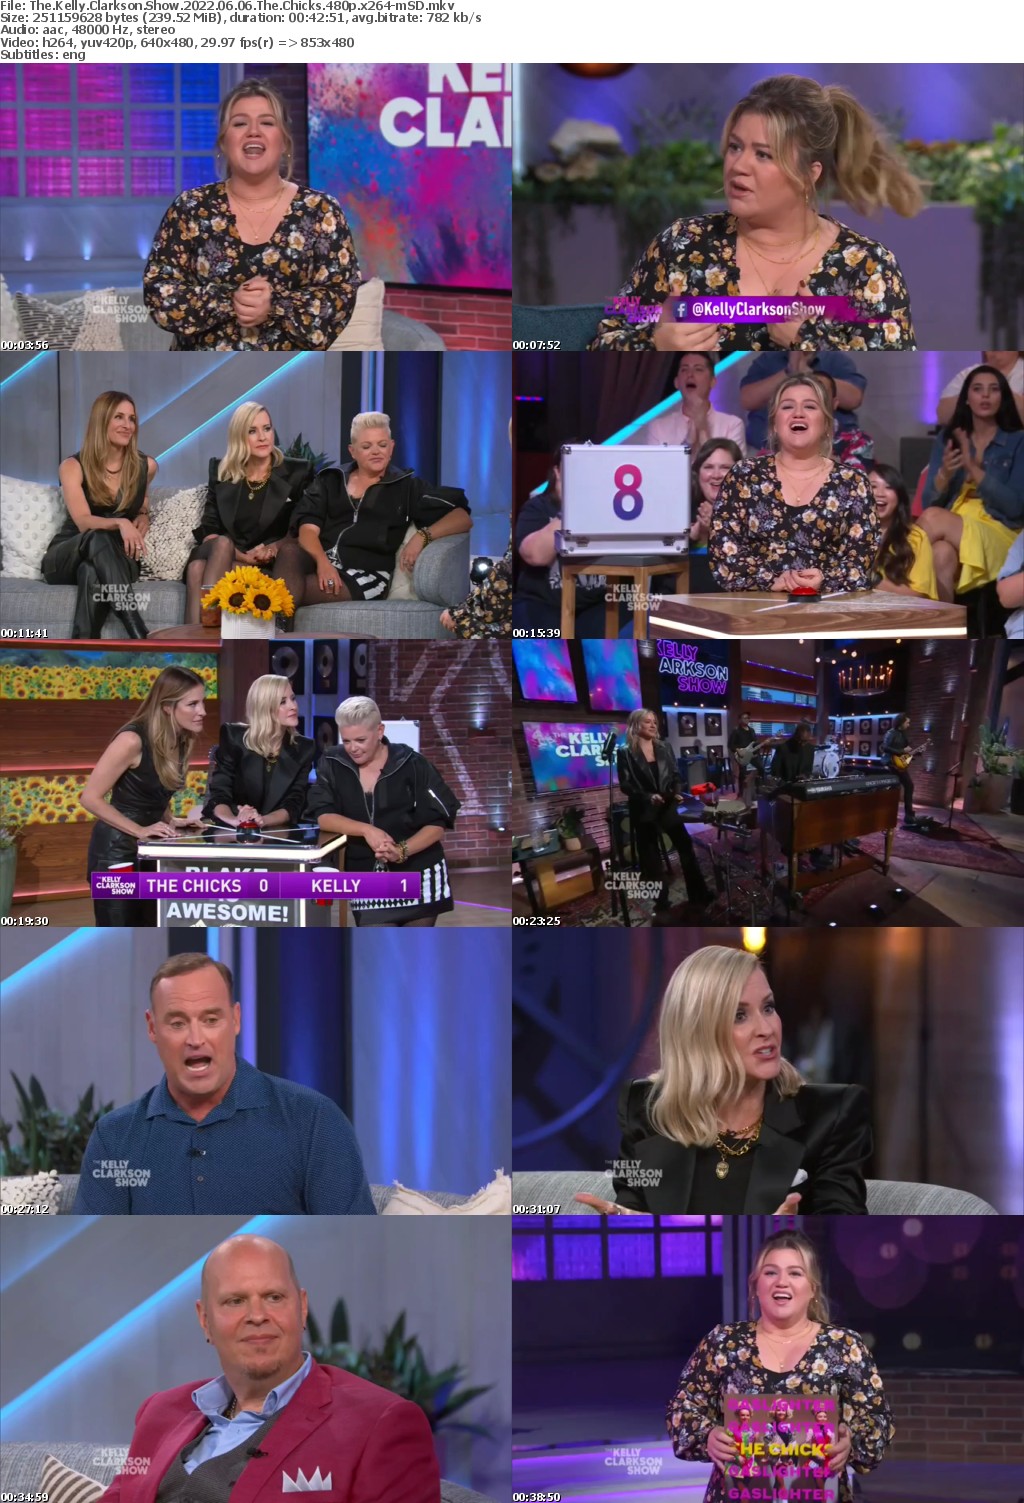 The Kelly Clarkson Show 2022 06 06 The Chicks 480p x264-mSD